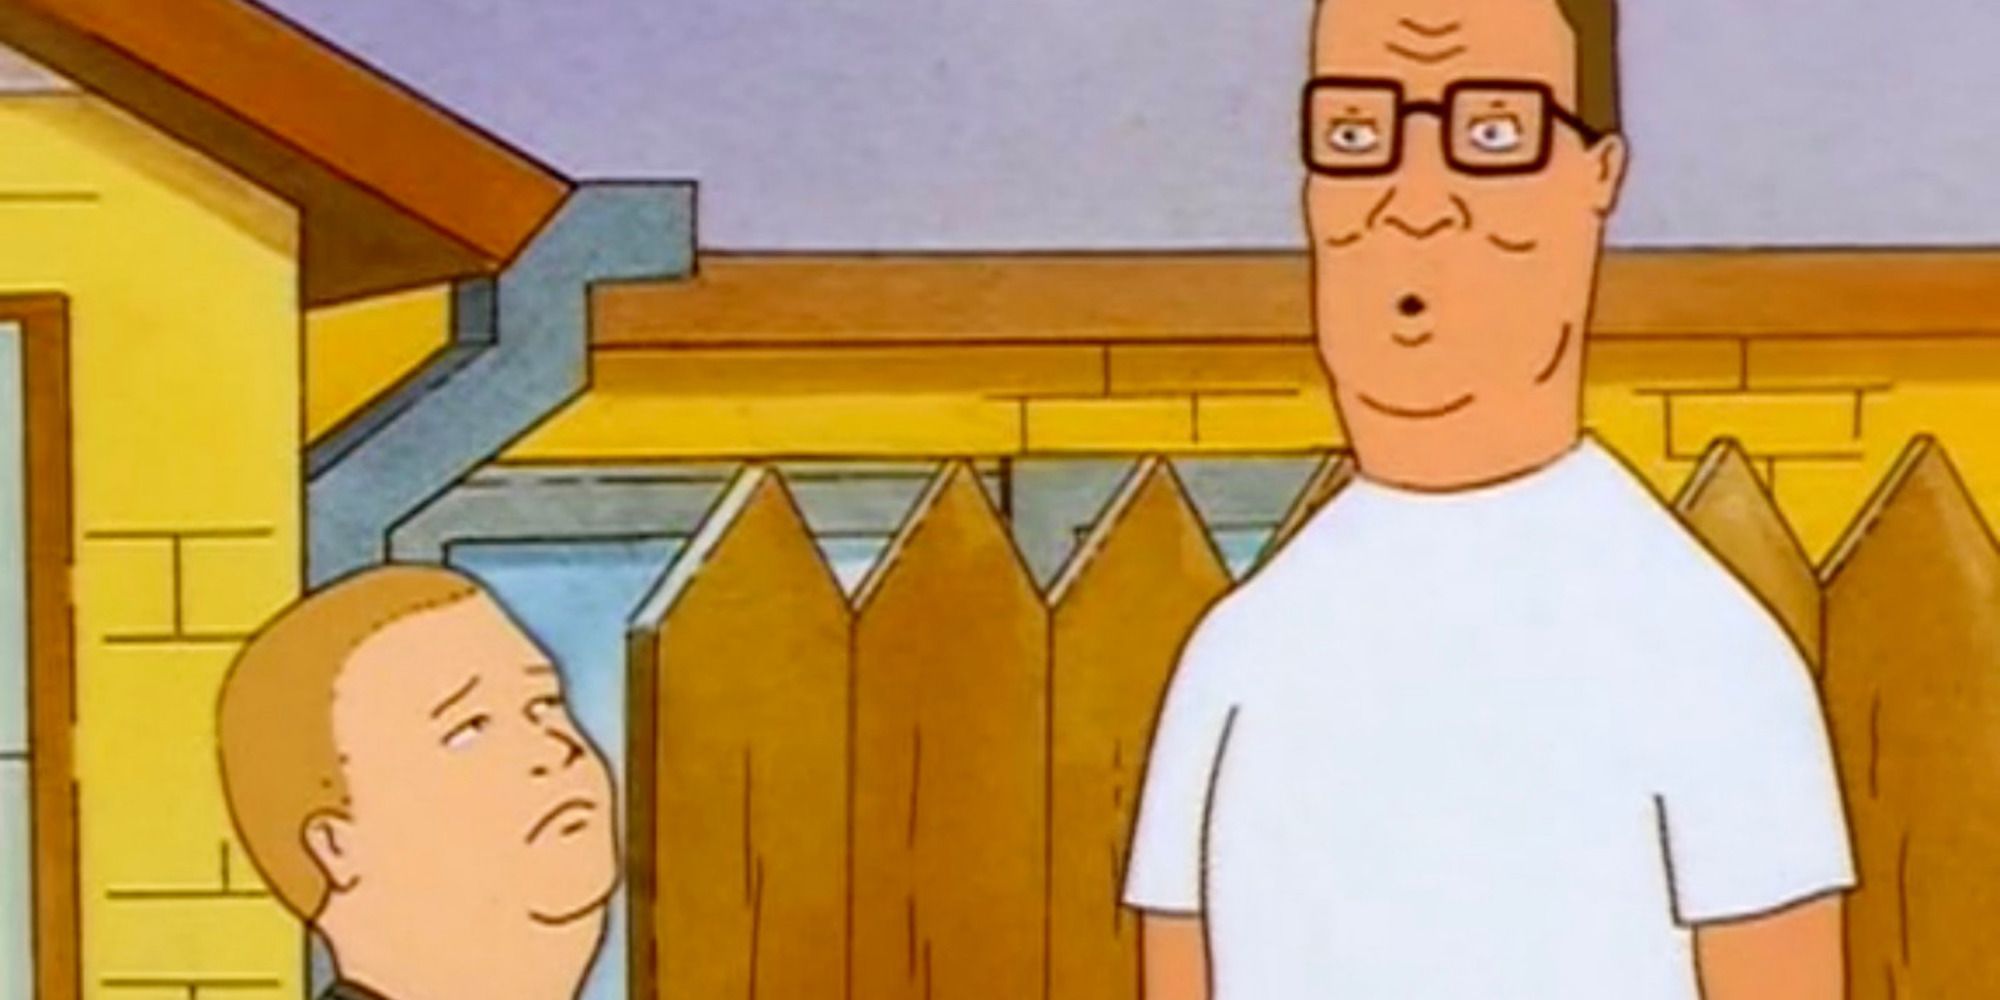 Bobby and Hank from King of the Hill